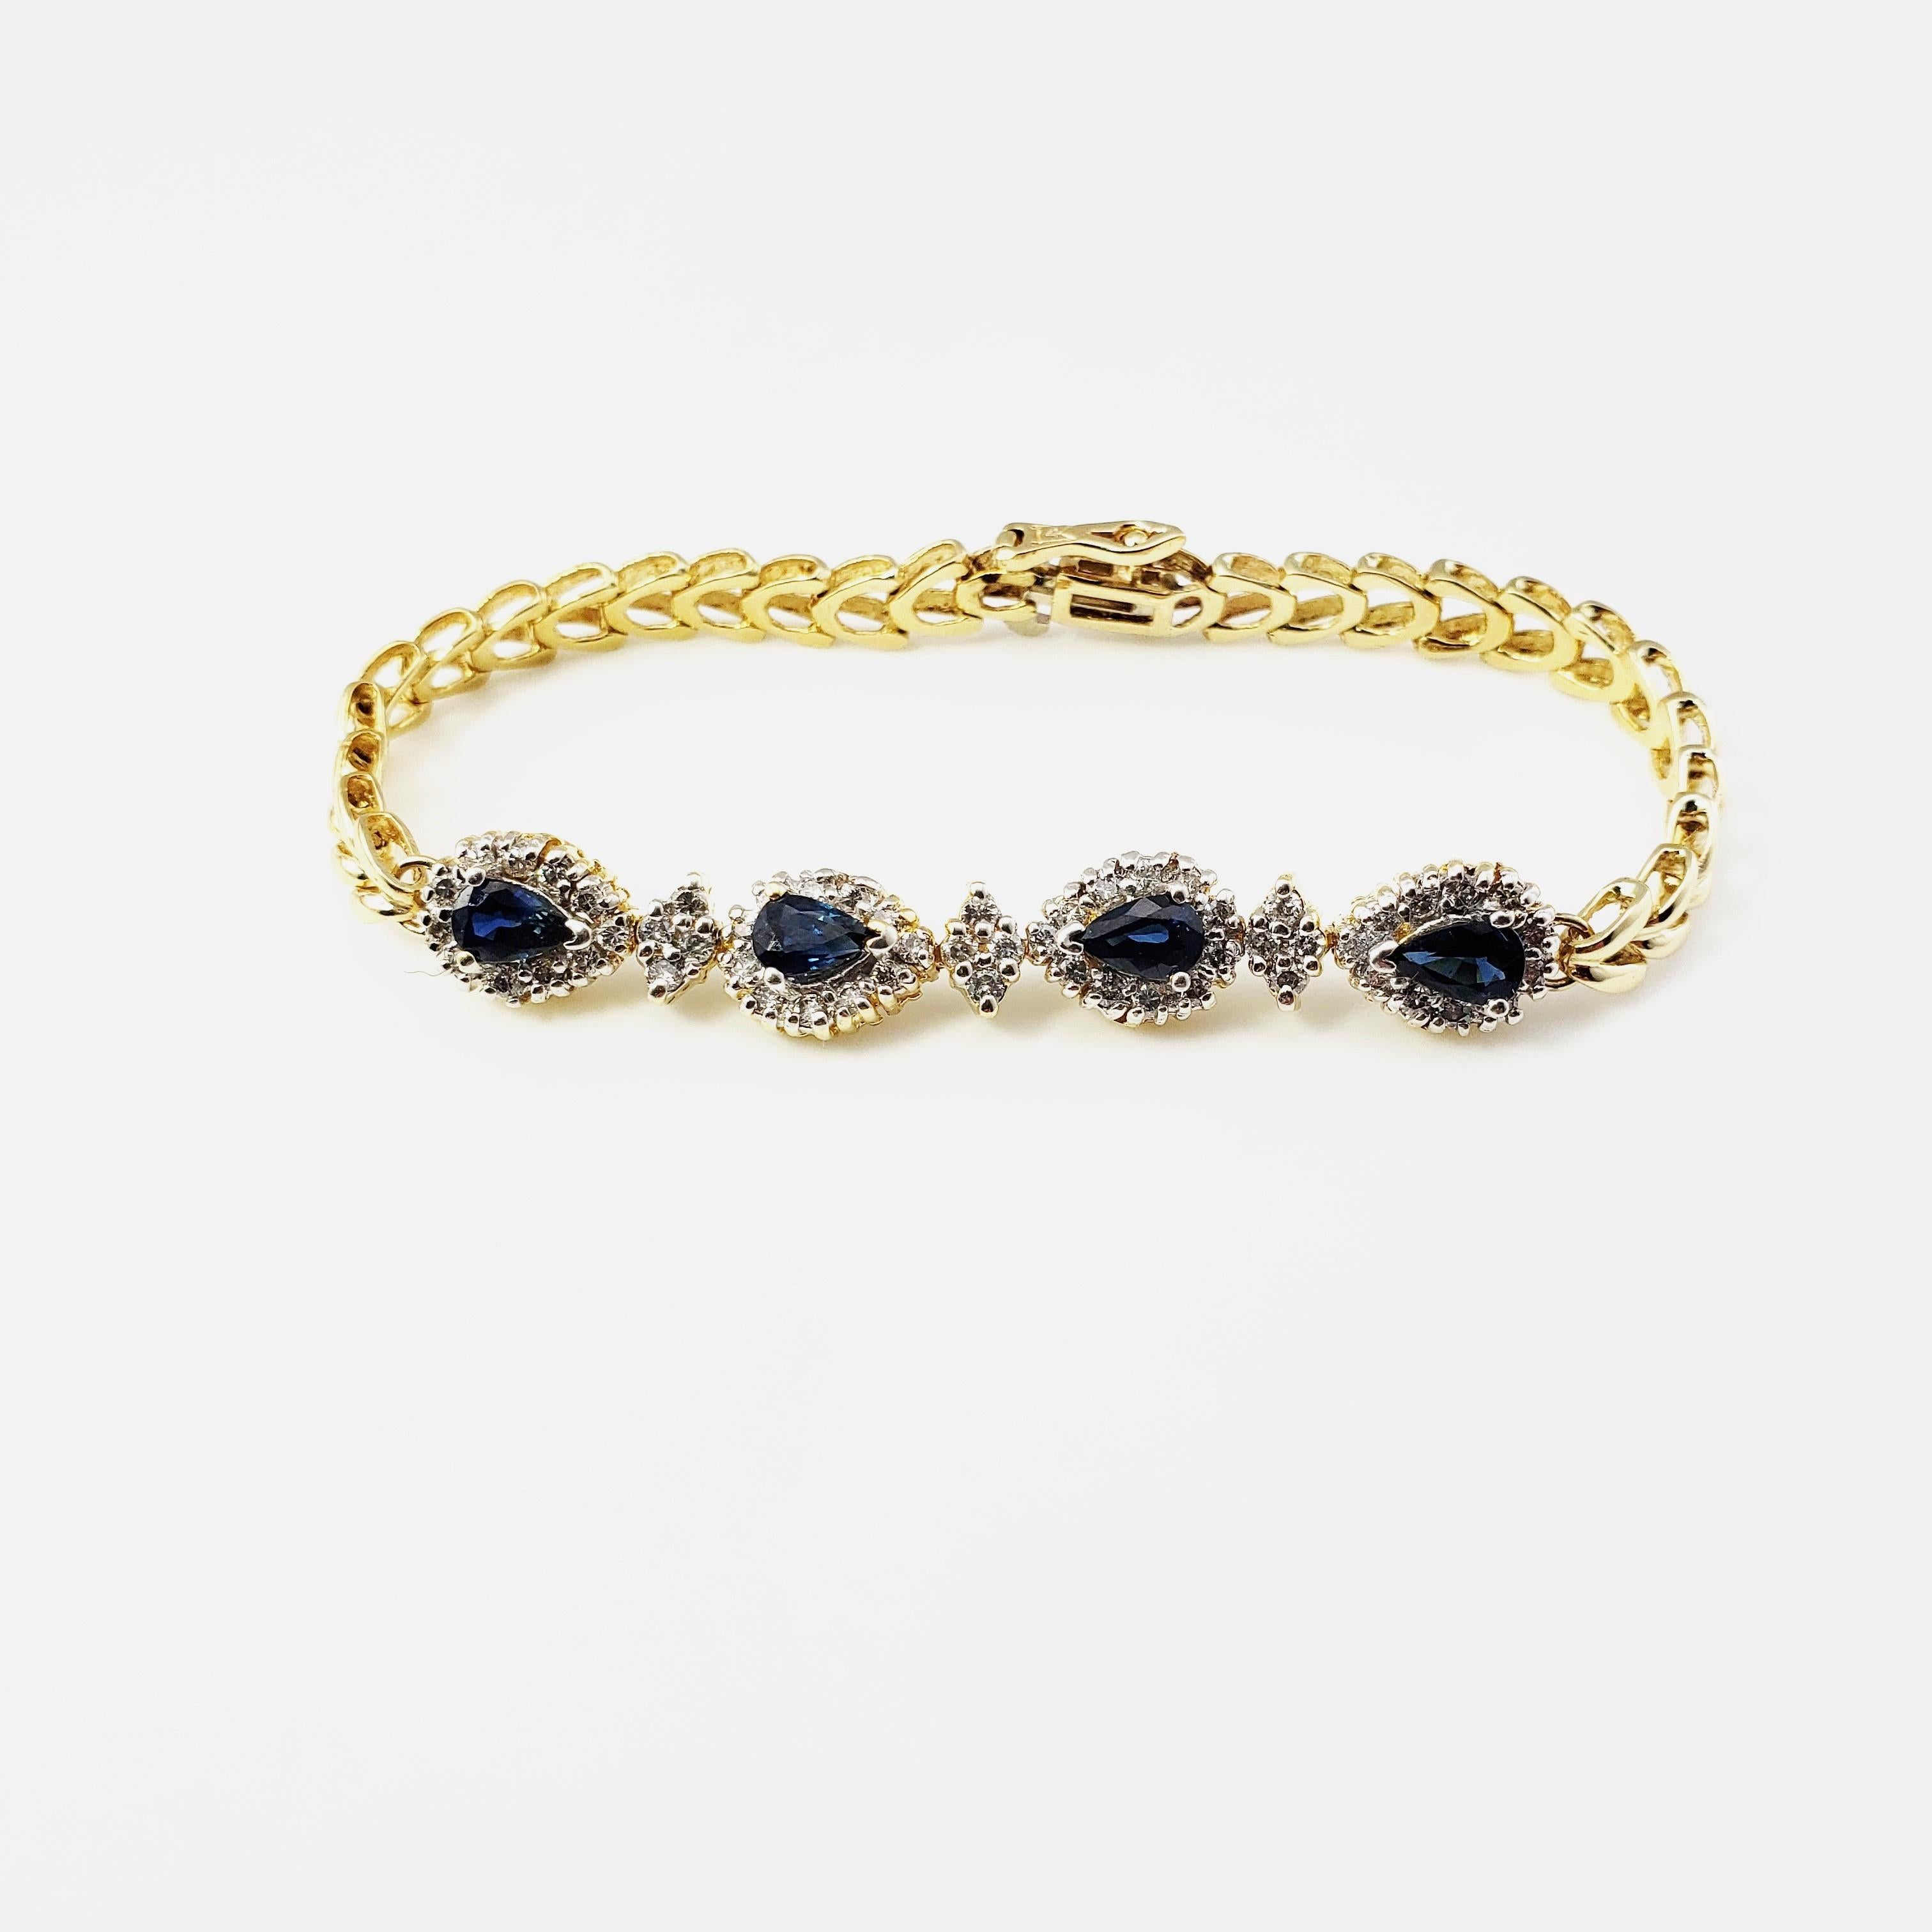 Vintage 14 Karat Yellow Gold Sapphire and Diamond Bracelet-

This lovely bracelet features four pear-shaped sapphires (7 mm x 5 mm each) and 56 round brilliant cut diamonds on a classic 14K yellow gold bracelet. Width: 8 mm. Safety